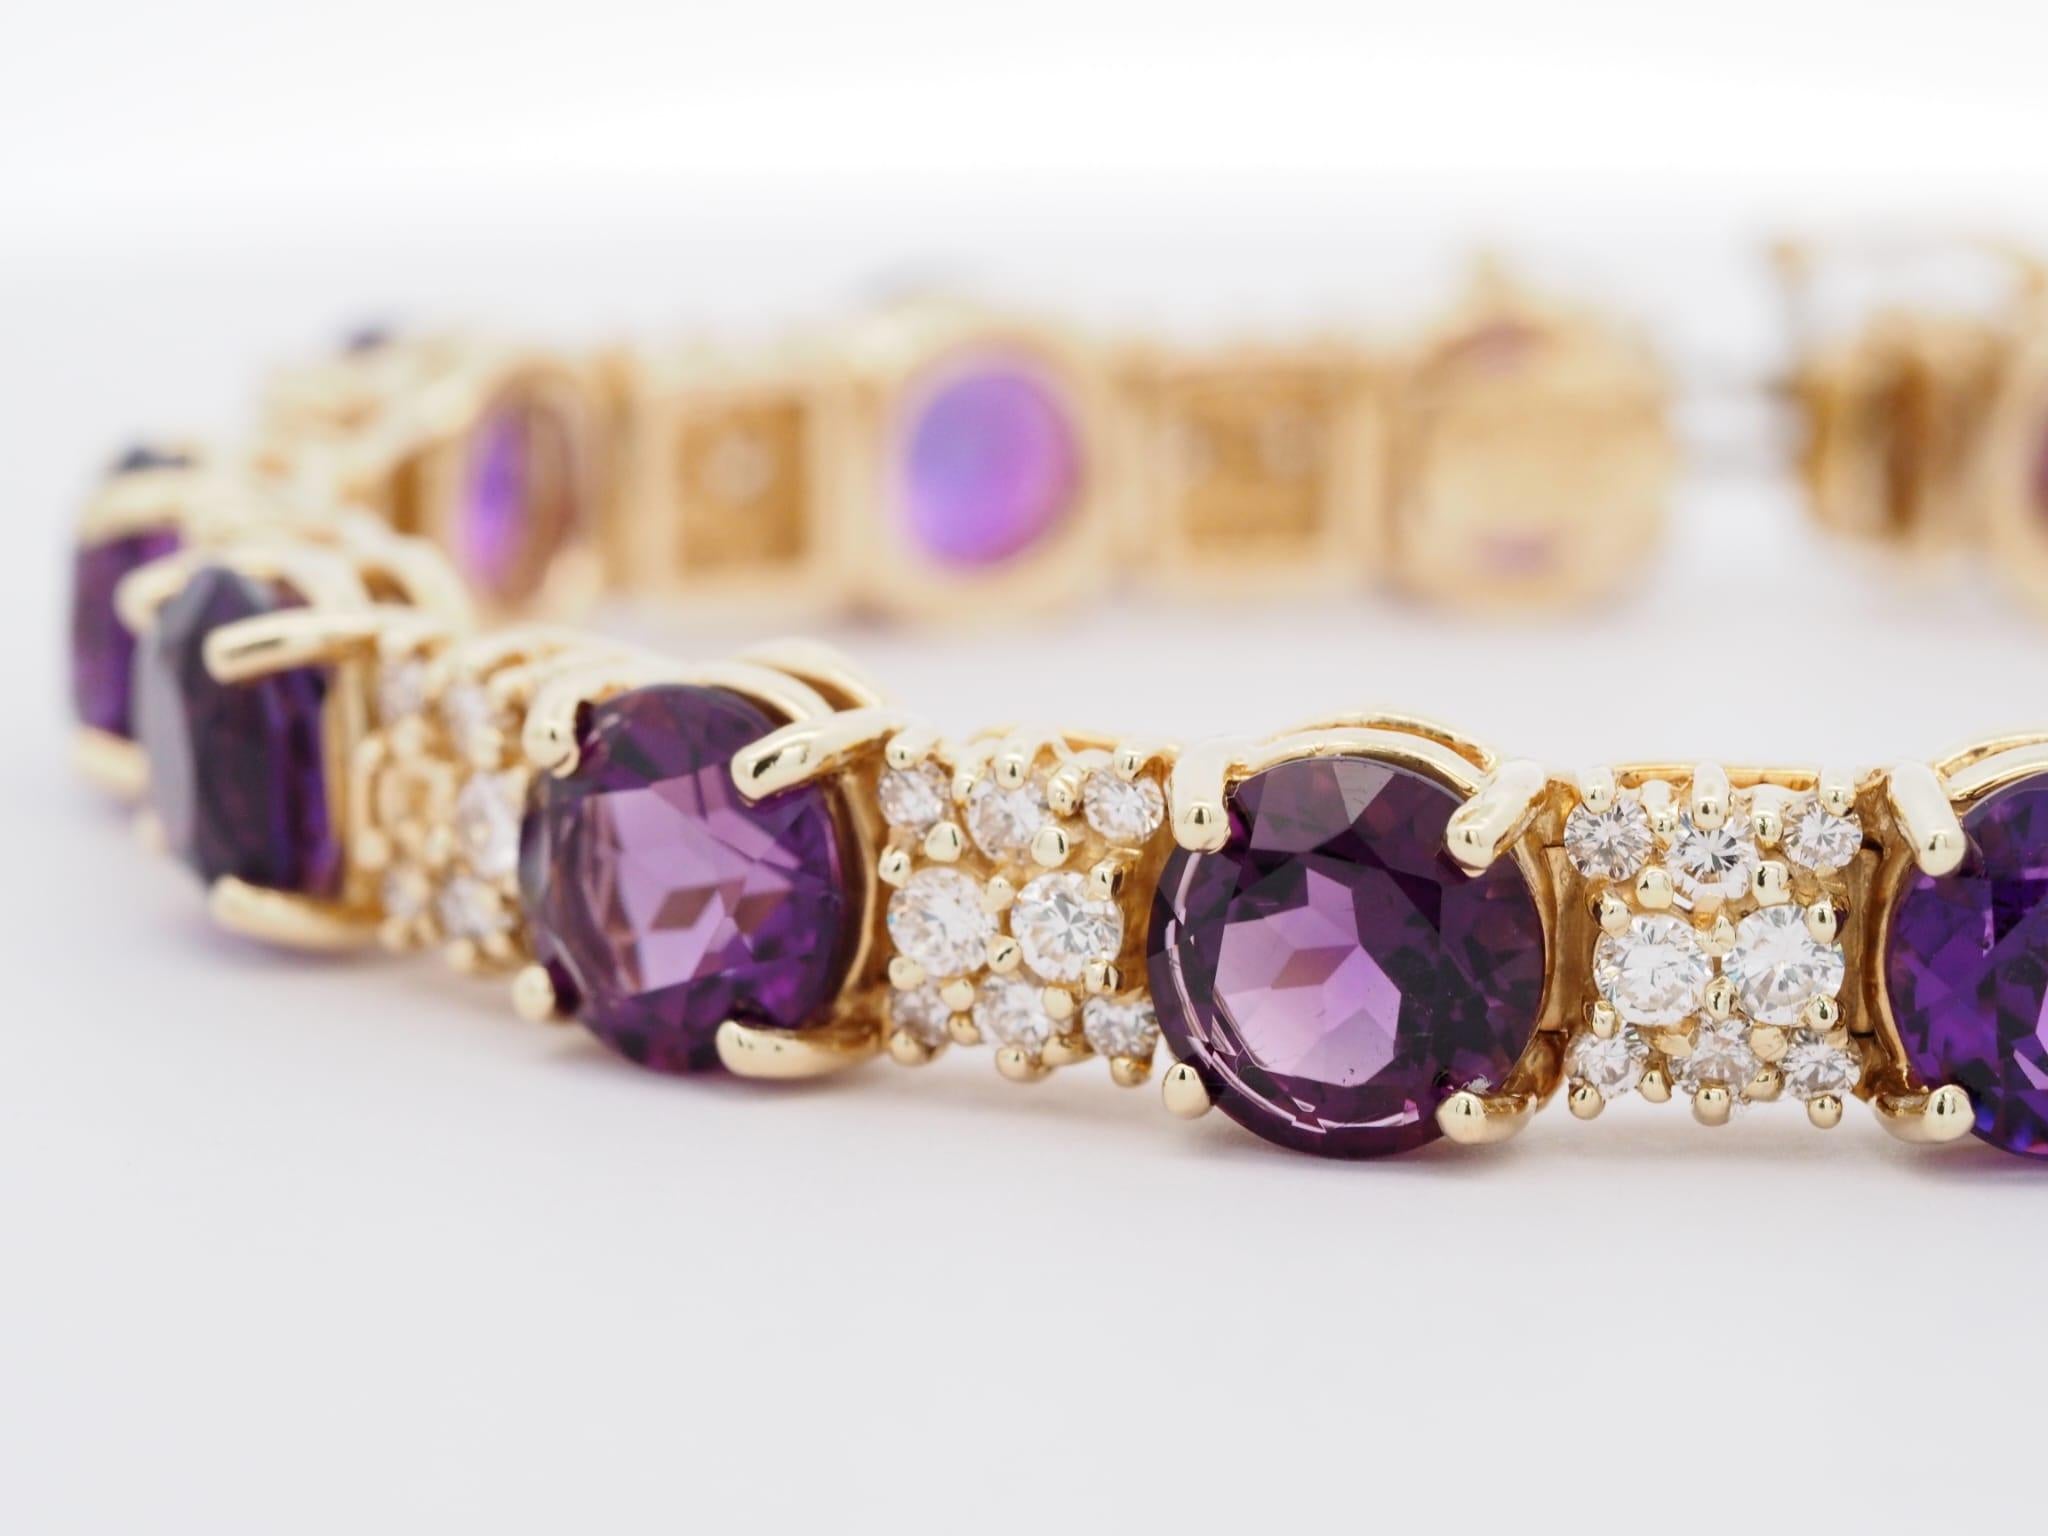 A beautiful piece of jewelry made by La Triomphe! It's an 18-karat yellow gold ring with a round-shaped Amethyst that weighs approximately 20 carat (each stone 8 x 8mm). The diamonds on the bracelet also total ~4 carat and have VS1-VS2 clarity, with